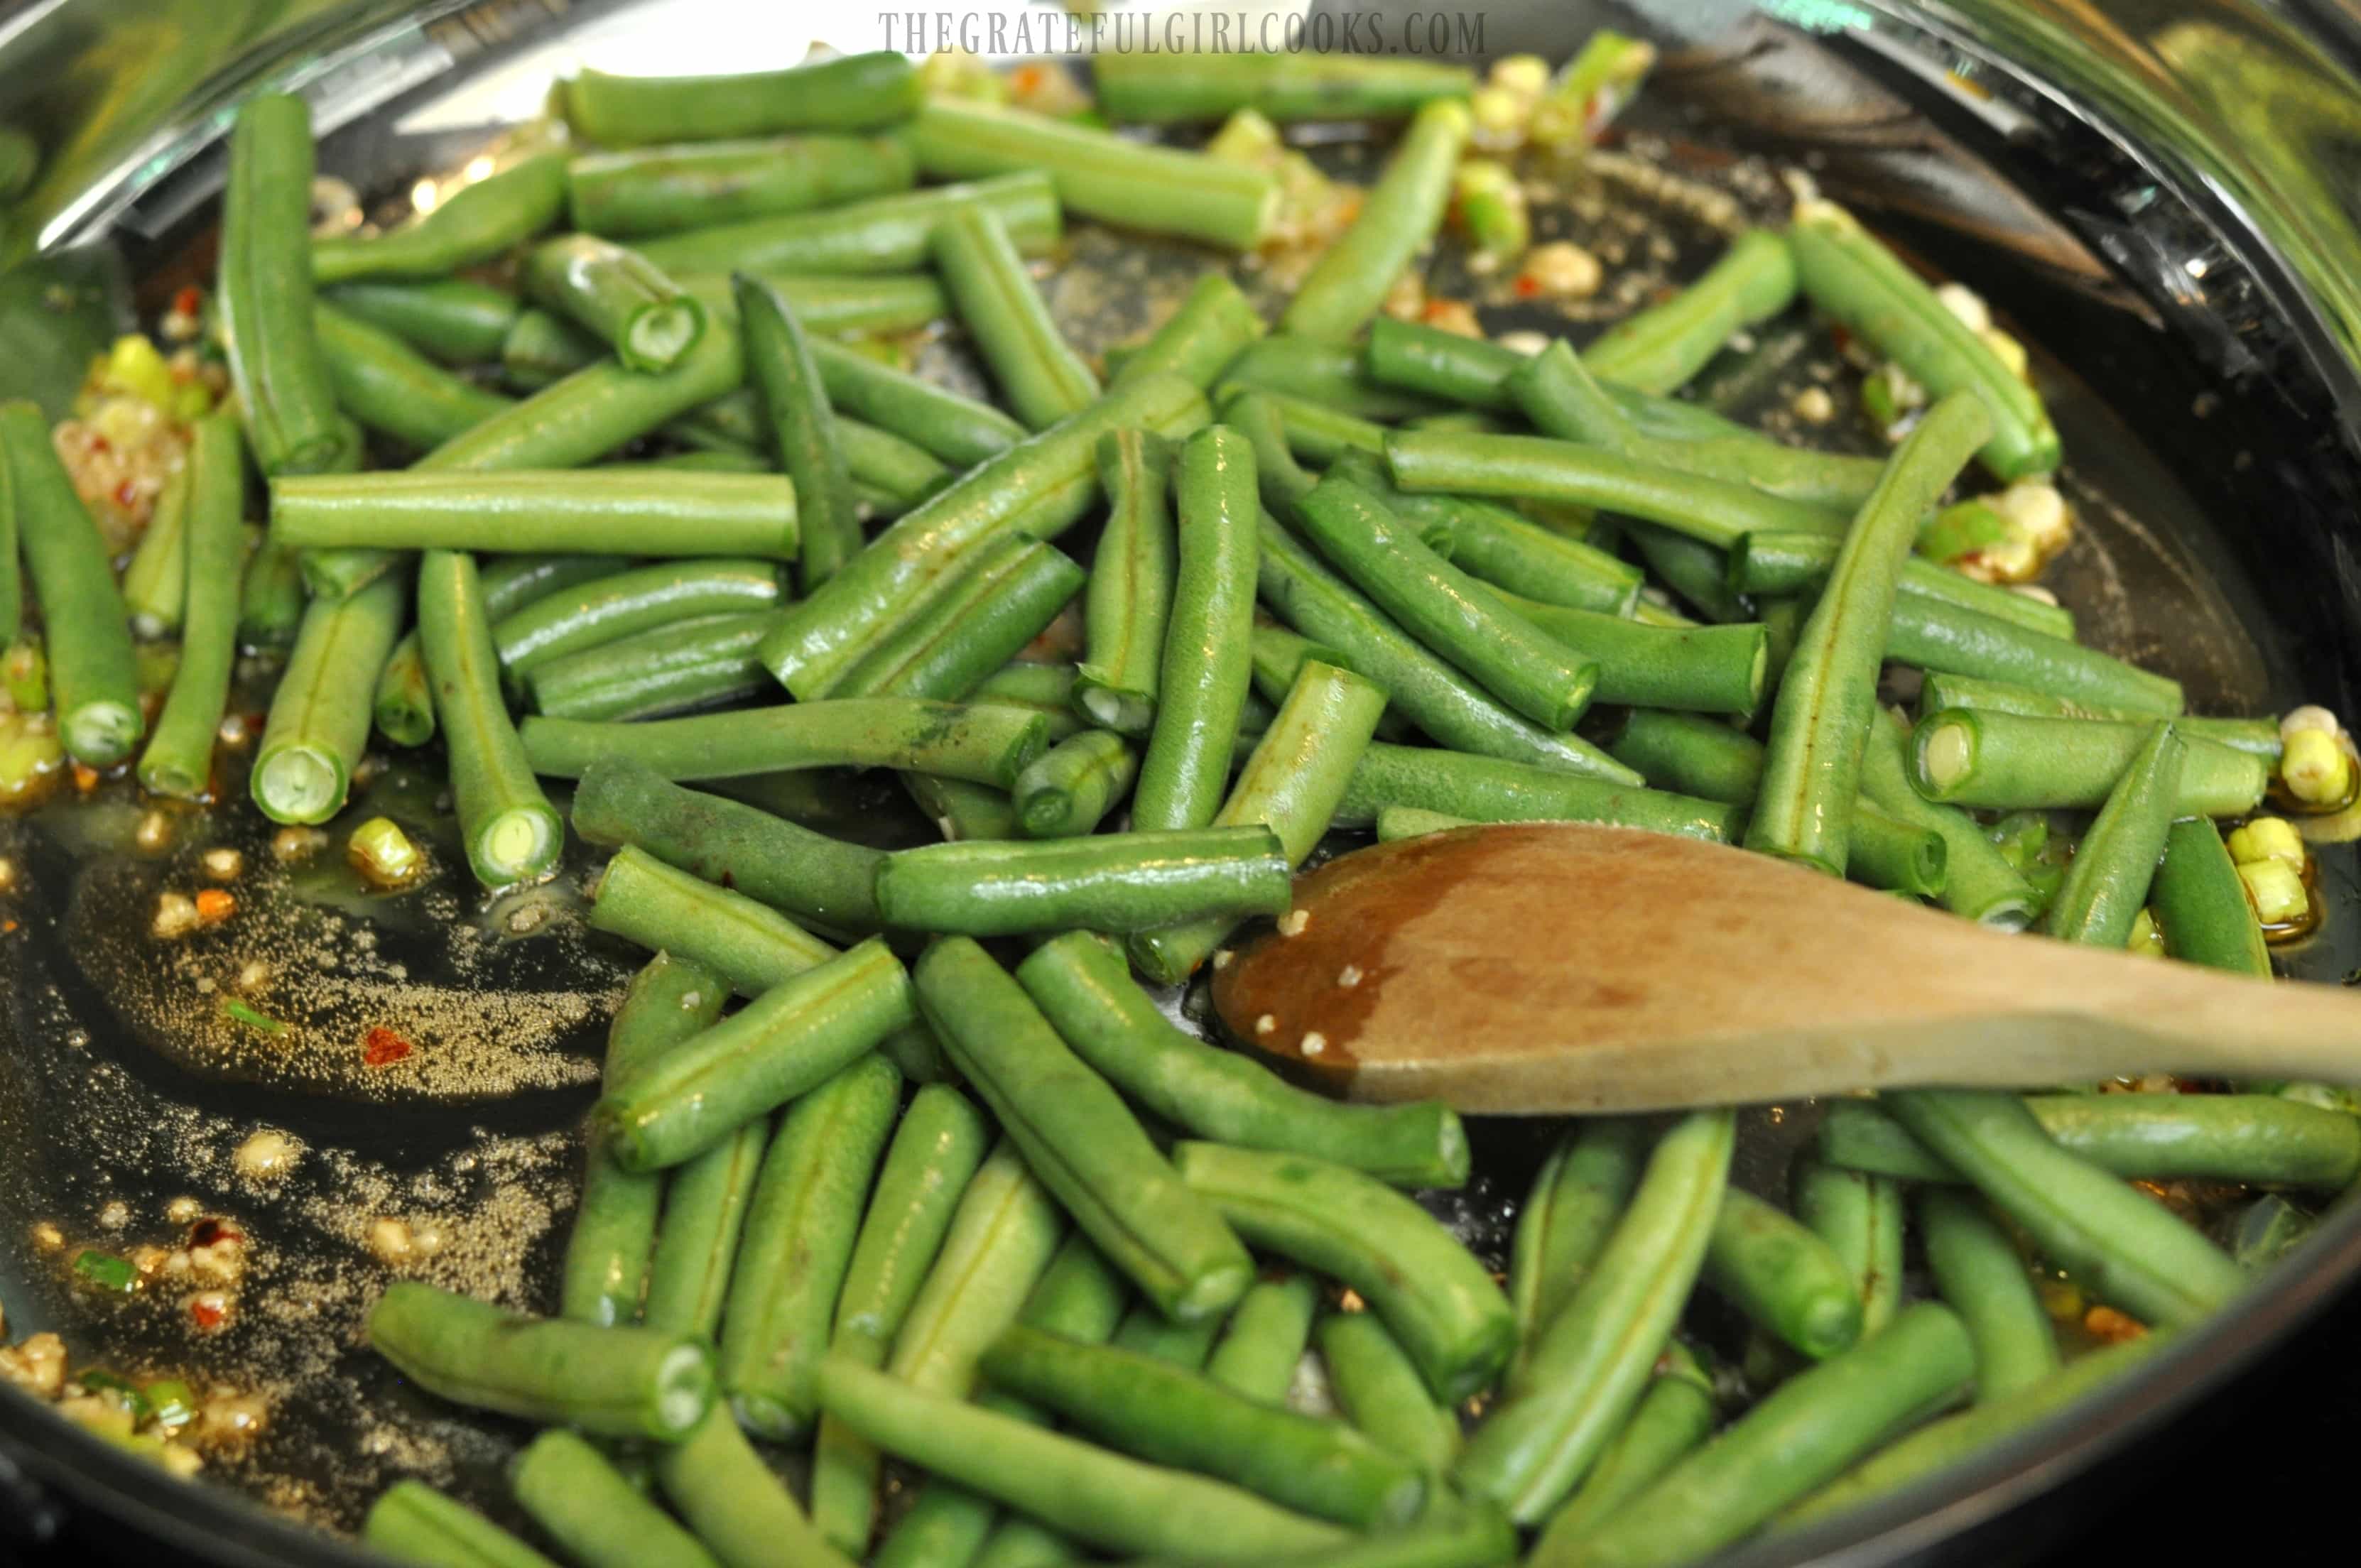 P.F. Chang’s Spicy Green Beans (copycat) | The Grateful Girl Cooks!